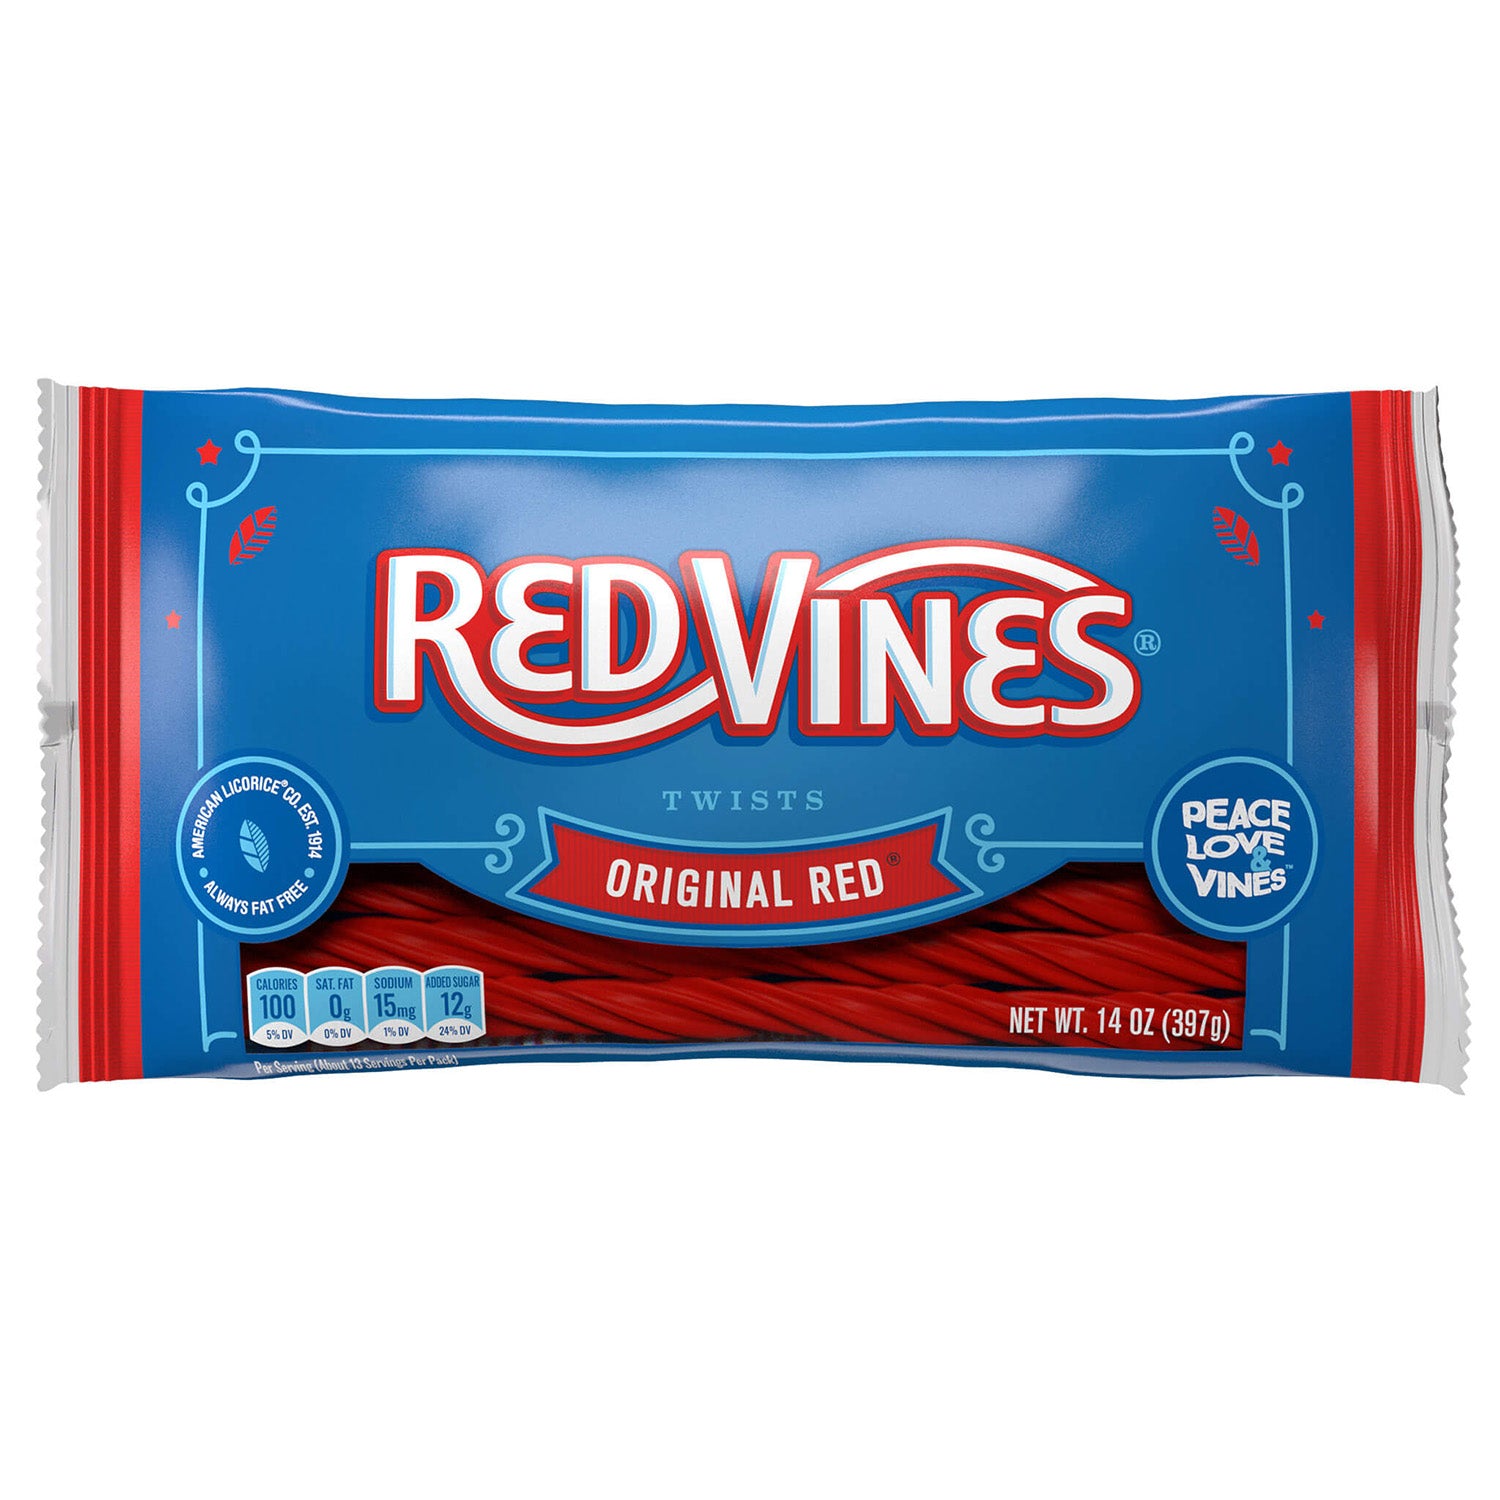 Red Vines Original Red Licorice Twists front of 14oz bag